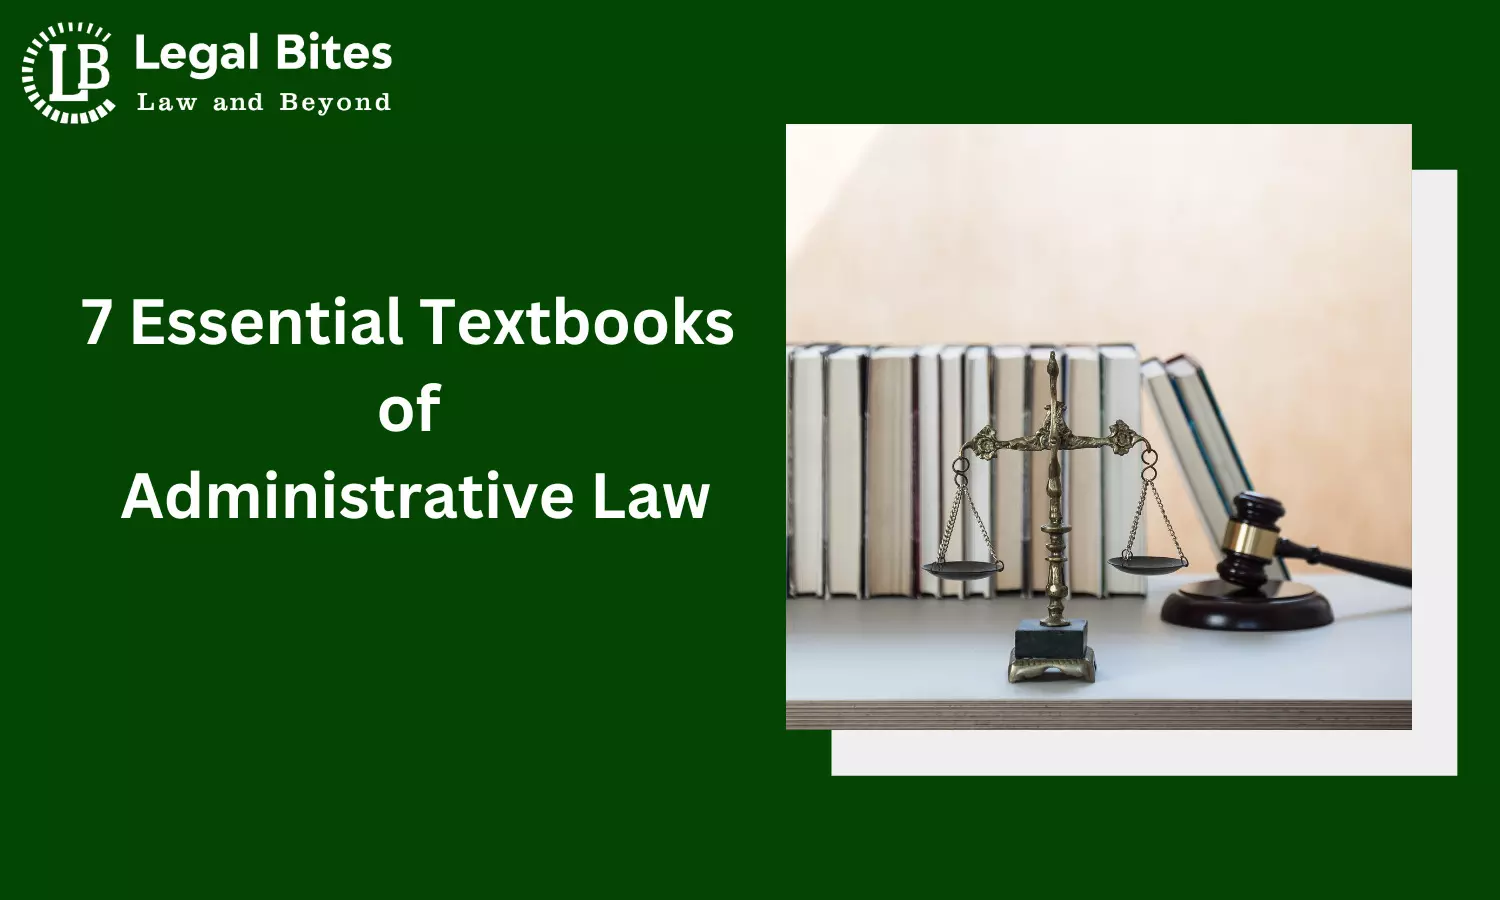 7 Essential Textbooks of Administrative Law